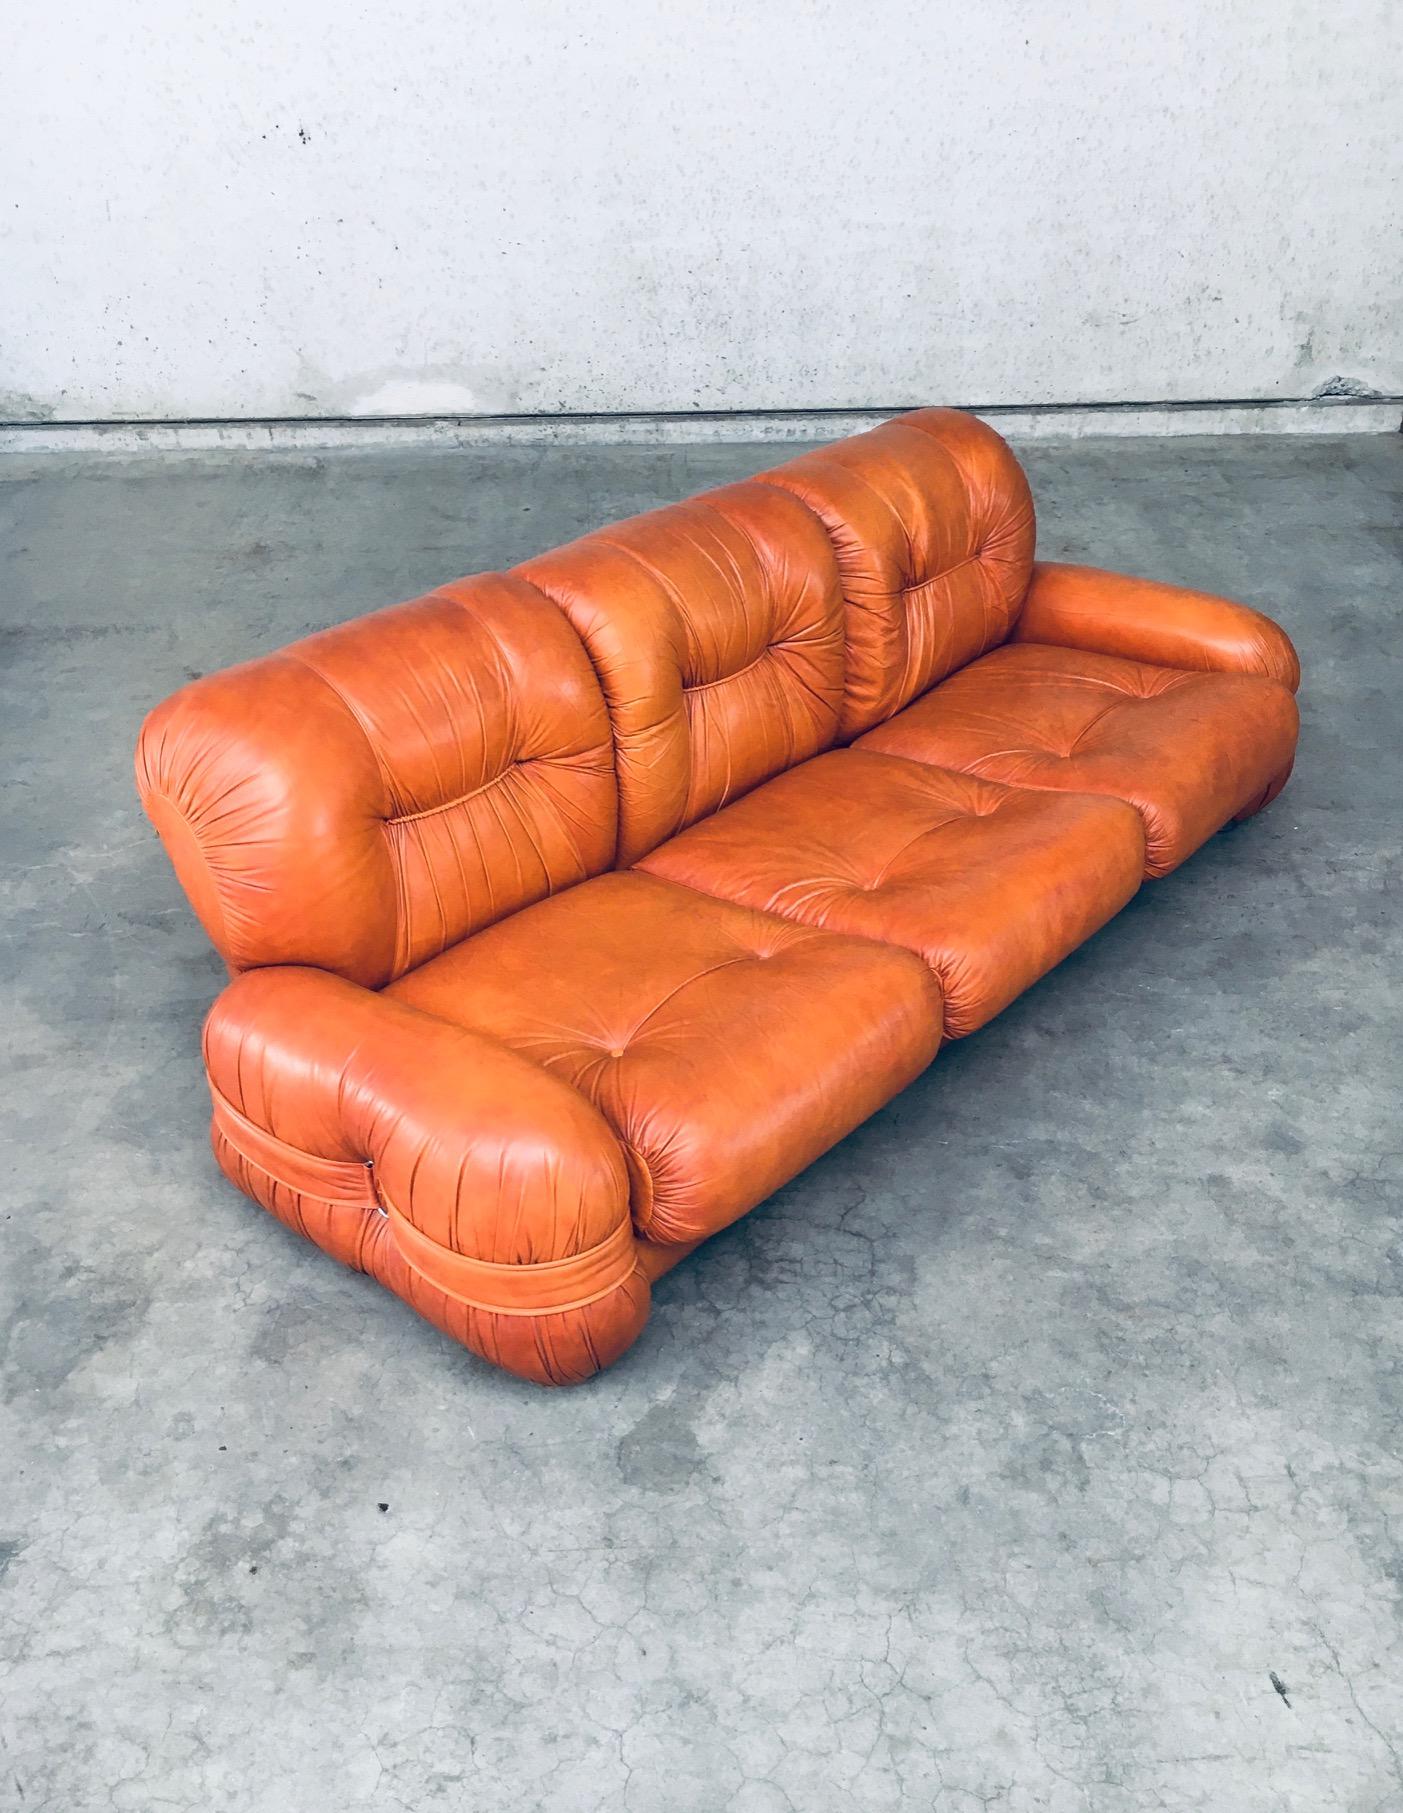 1970's Midcentury Modern Italian Design Leather 3 Seat Sofa In Good Condition For Sale In Oud-Turnhout, VAN